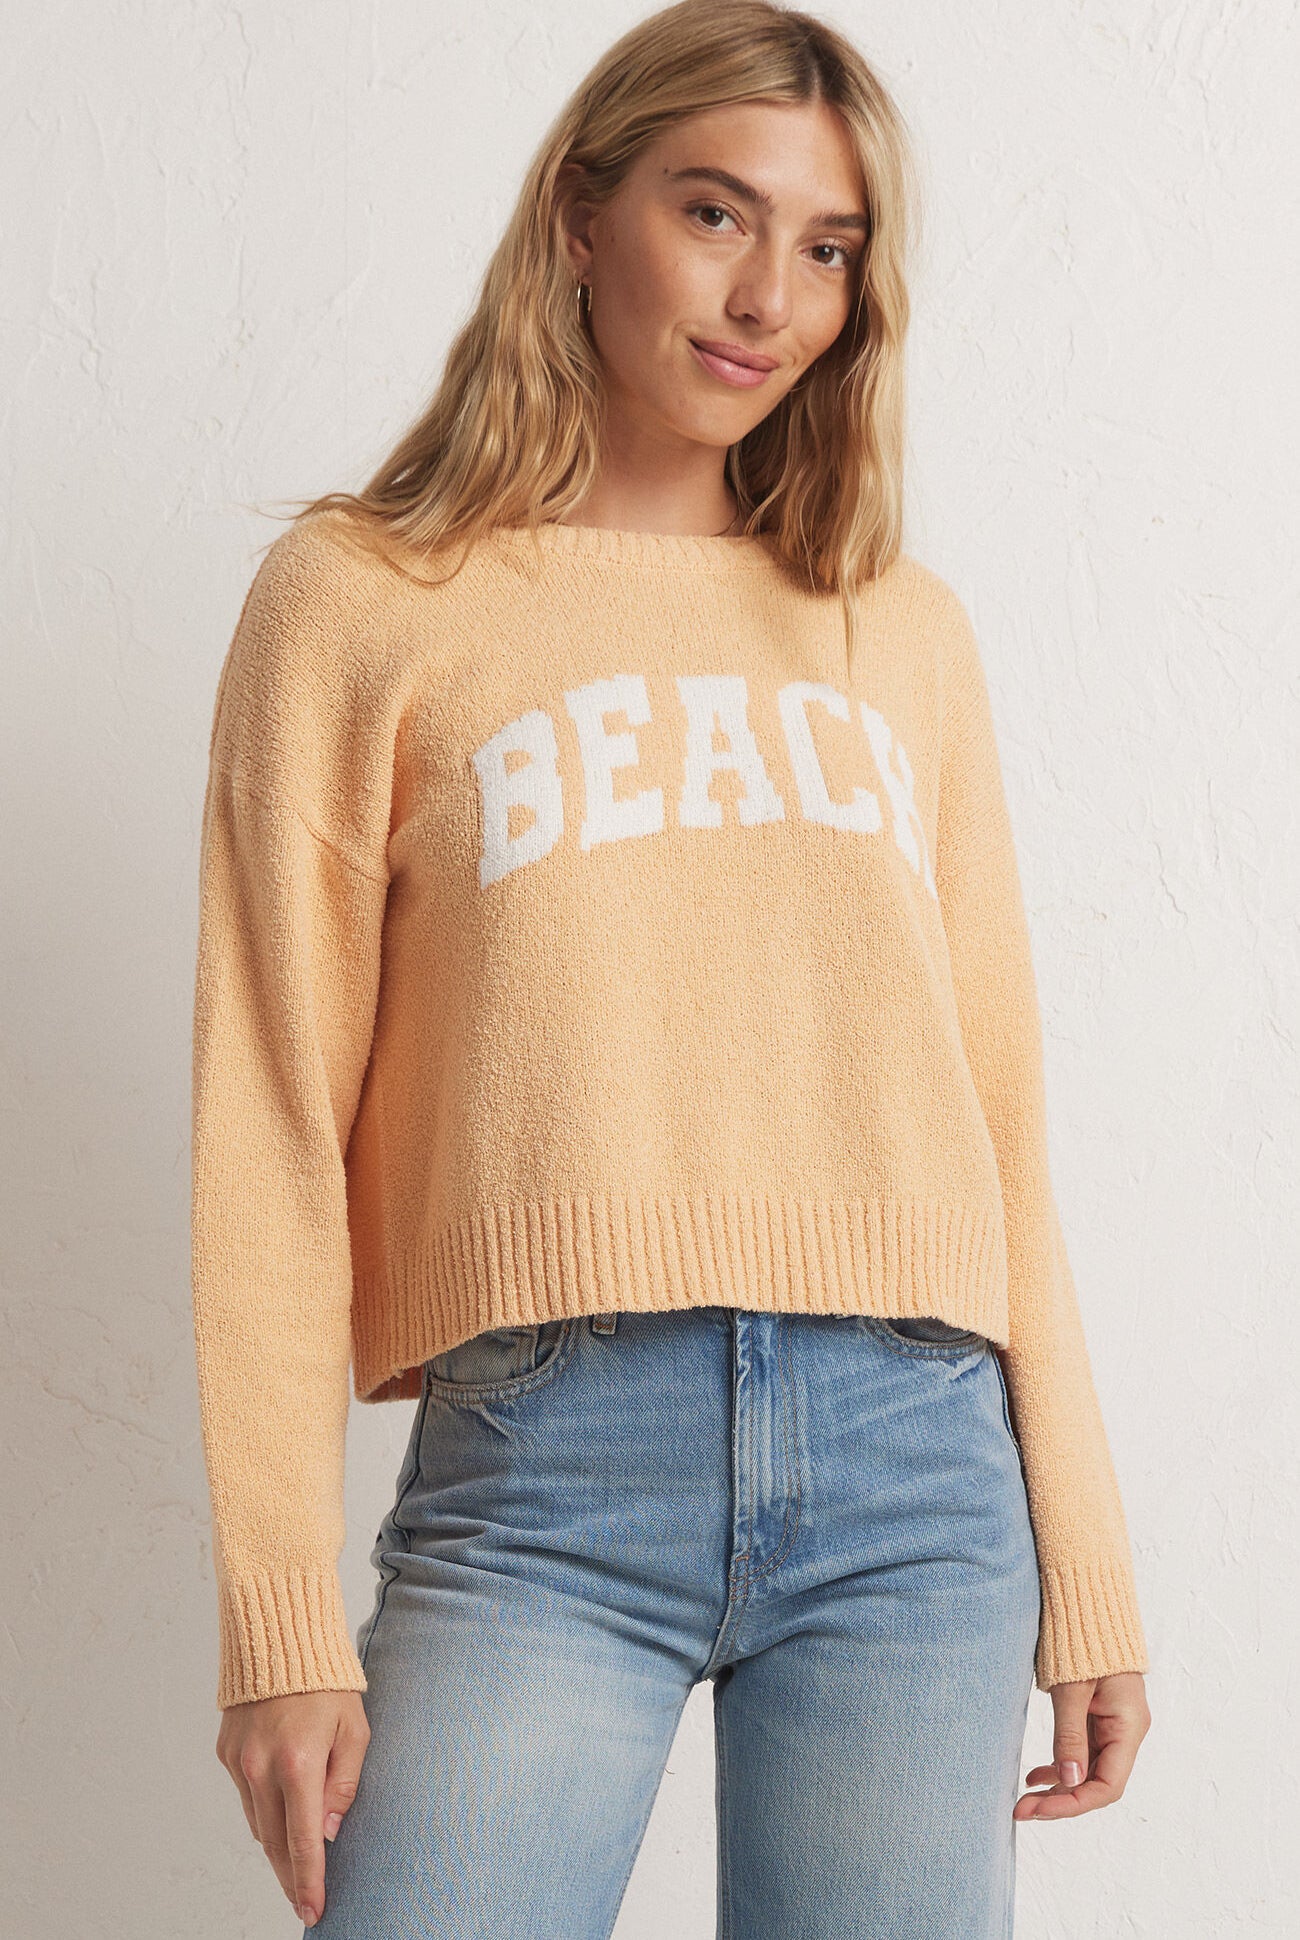 Z Supply Beach Sweater-Sweaters-Vixen Collection, Day Spa and Women's Boutique Located in Seattle, Washington